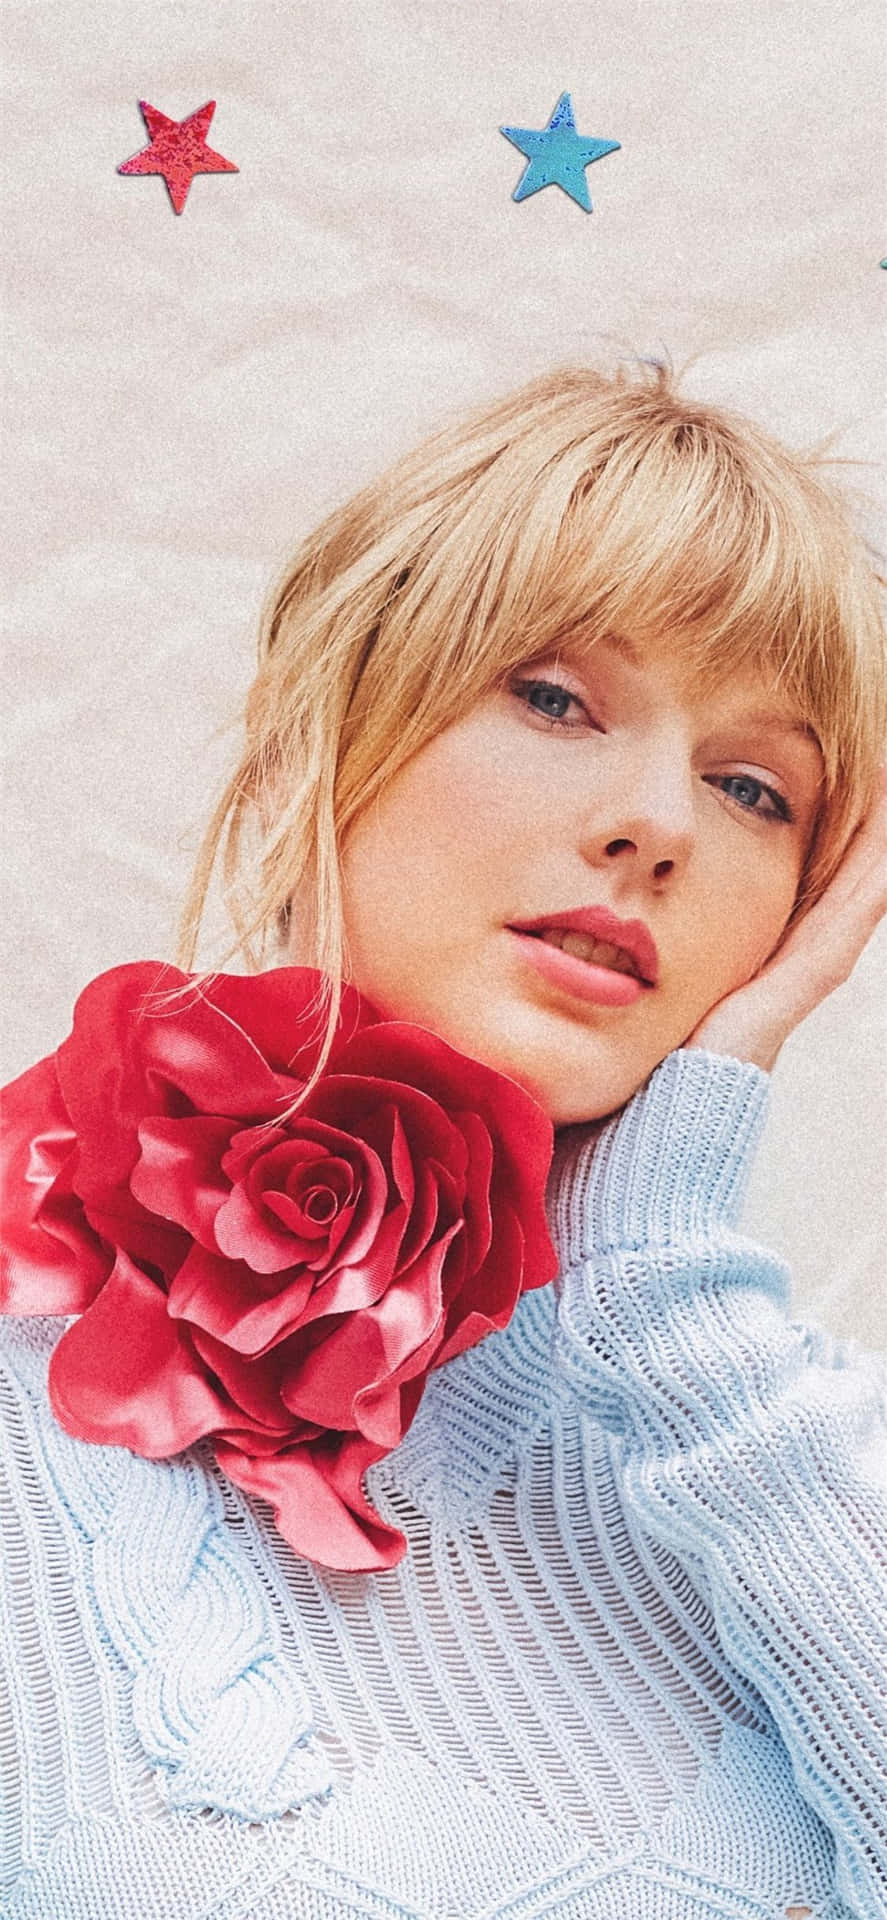 100+] Taylor Swift Iphone Wallpapers | Wallpapers.Com